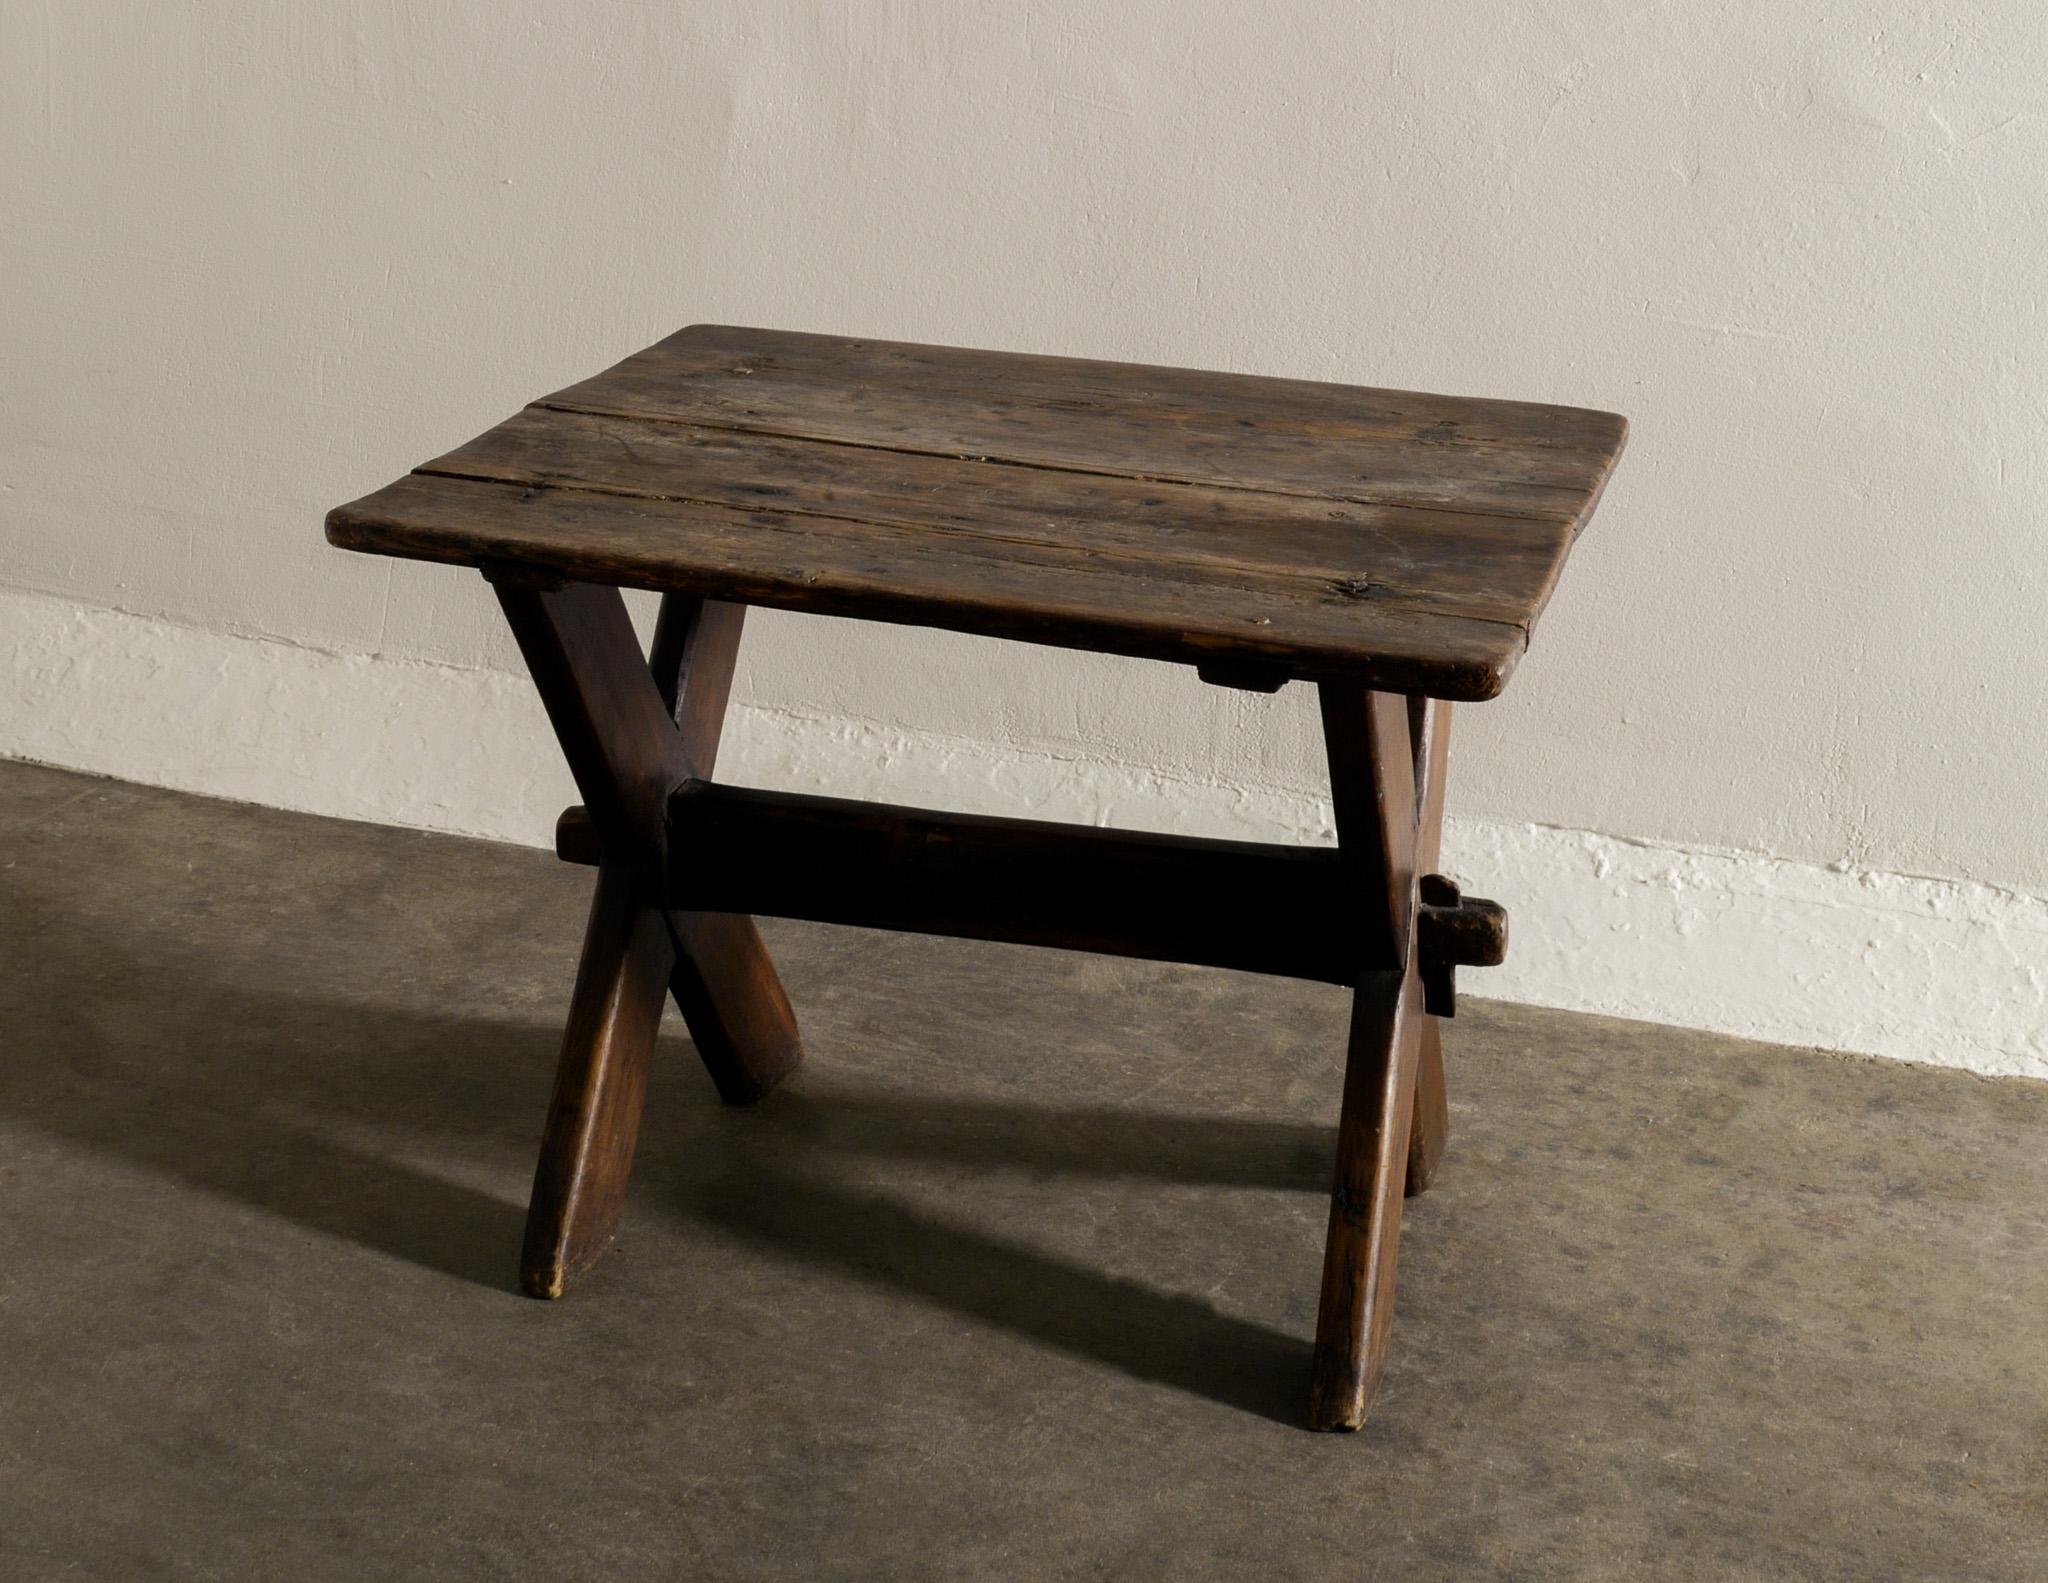 19th Century Swedish Primitive Side Coffee Table in Stained Pine Produced in the Late 1800s